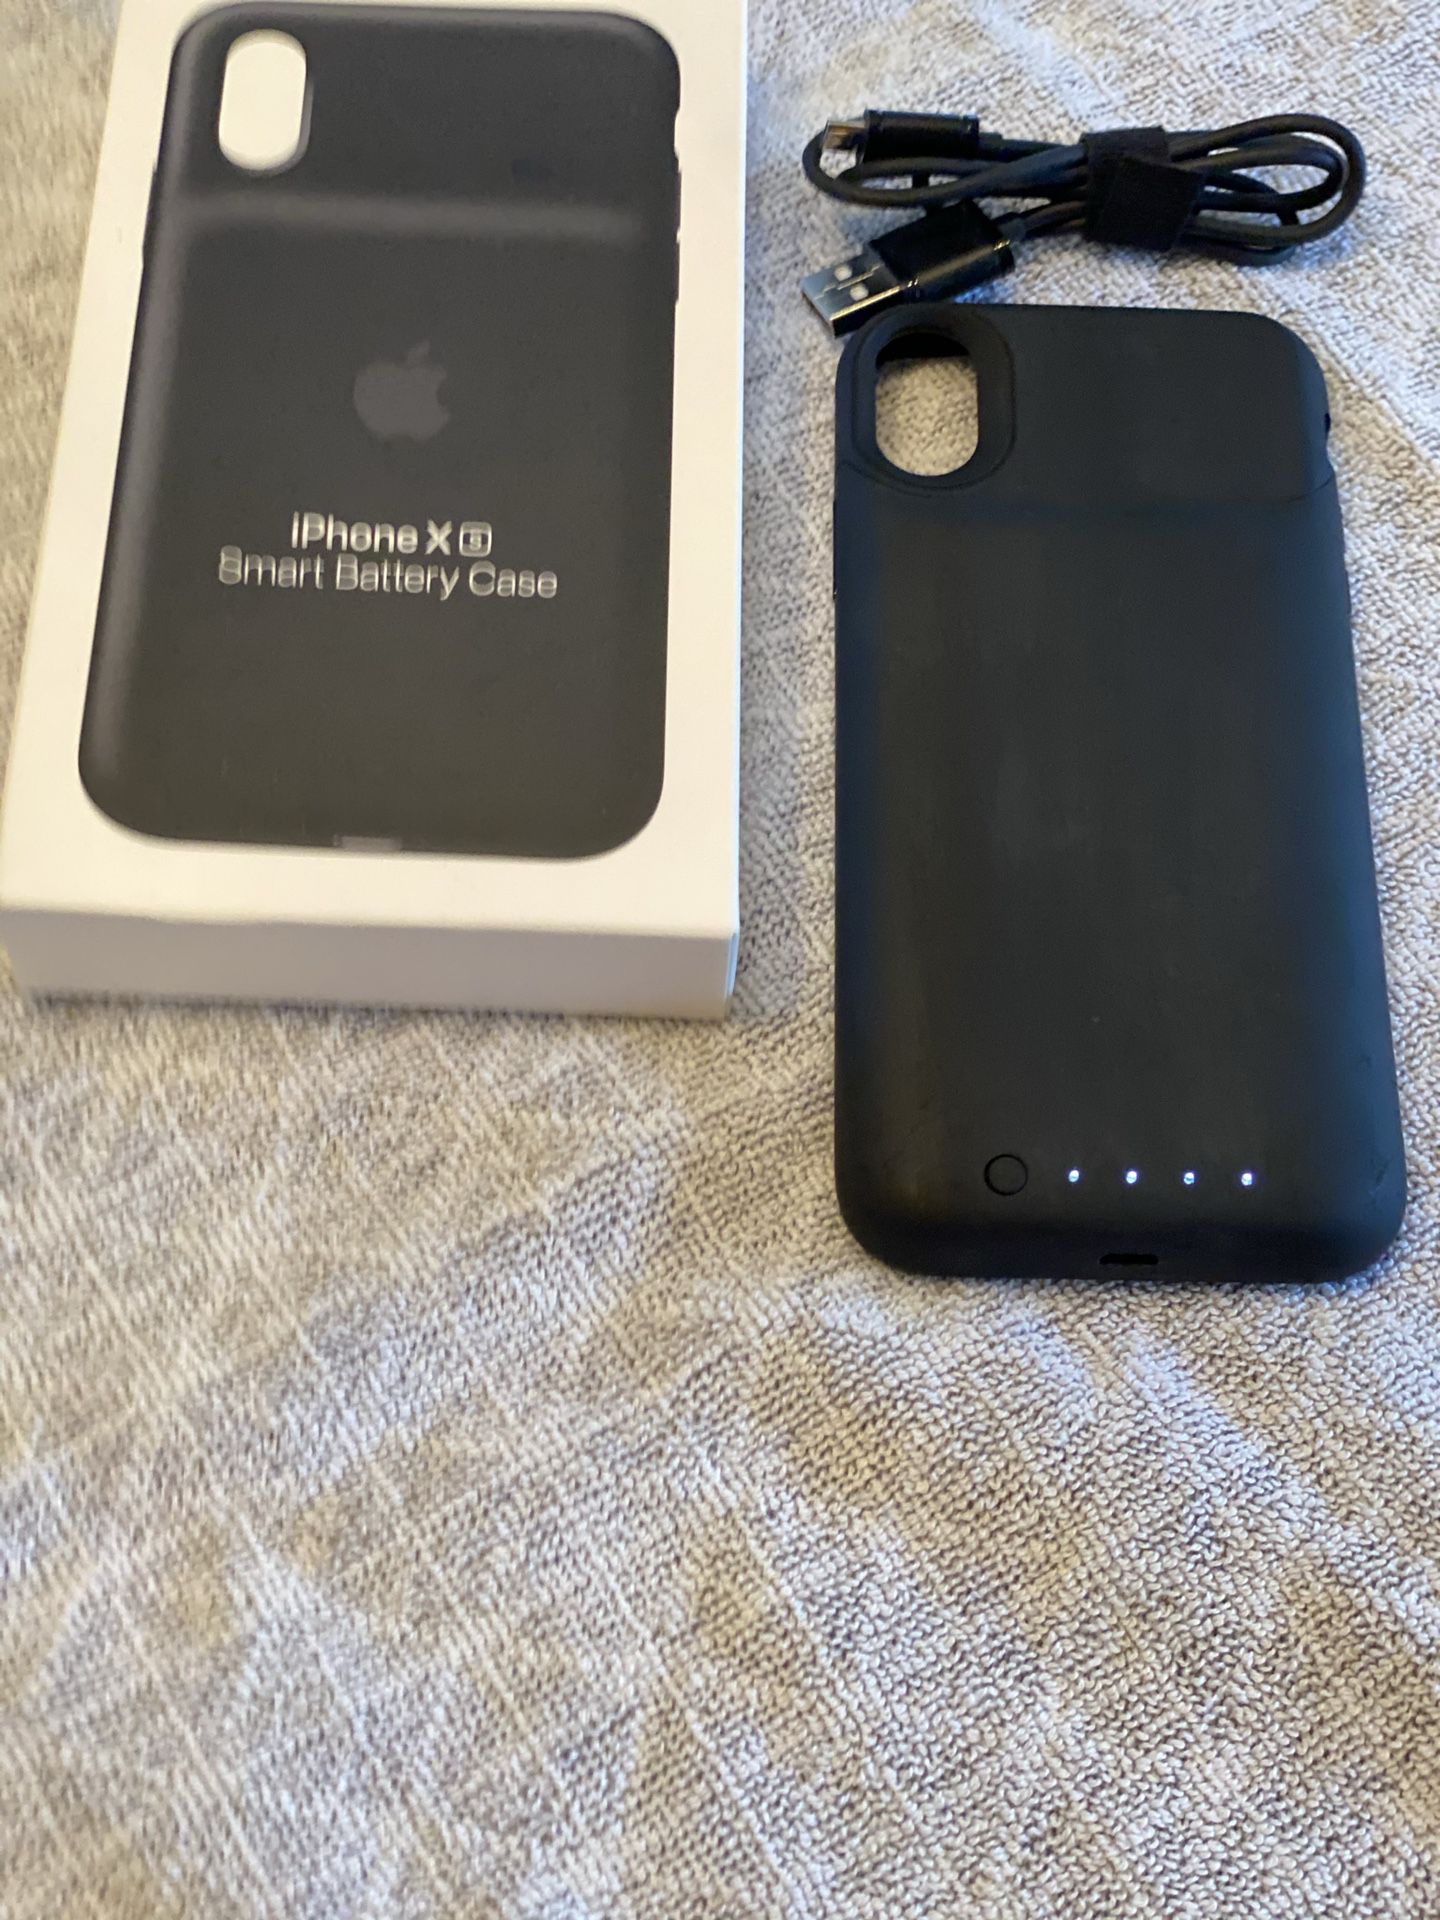 PPU - Mophie BATTERY CASE for iPhone X - XS - WORKS GREAT!